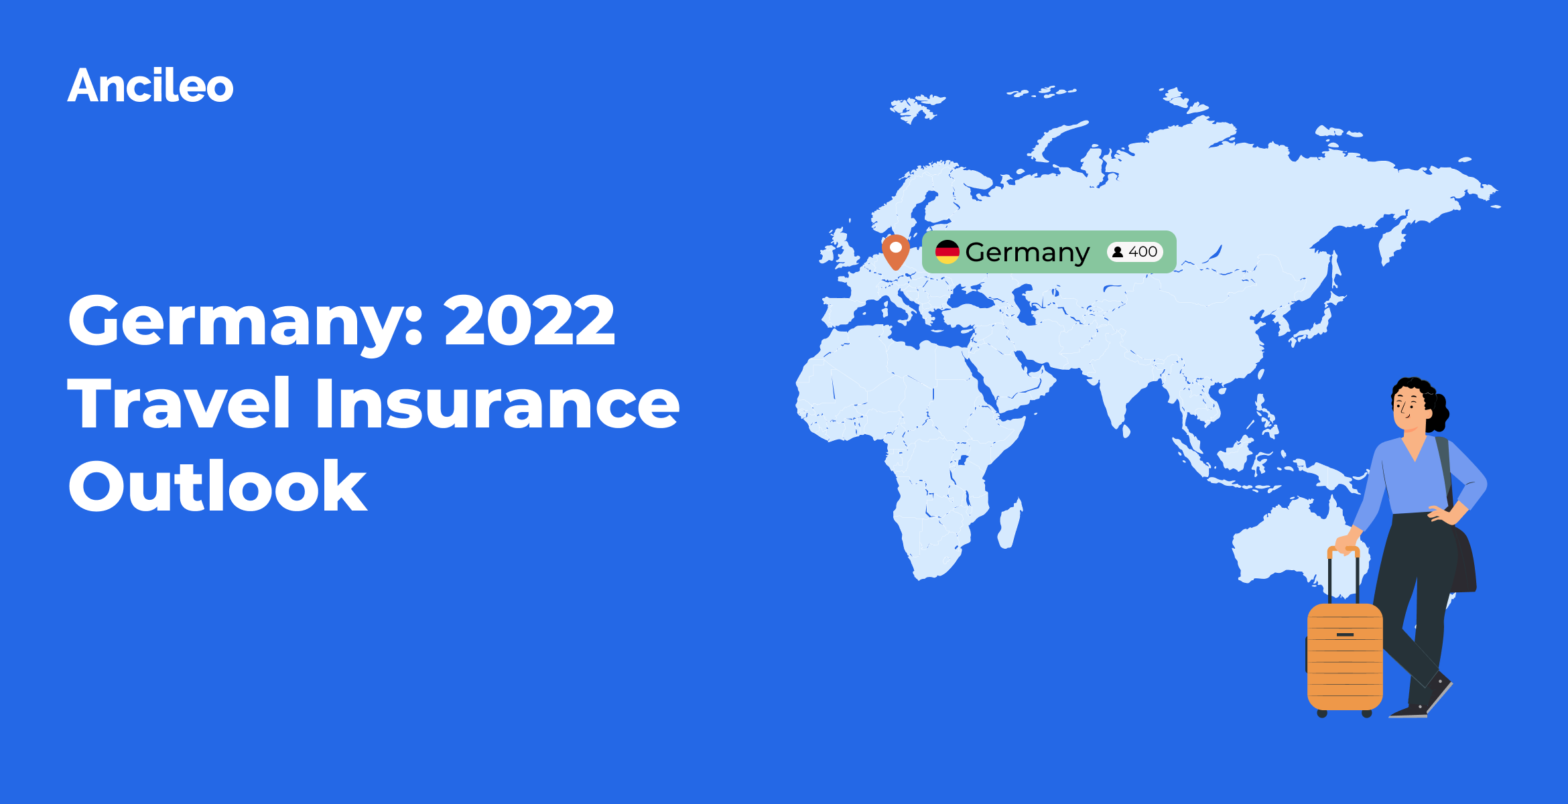 Germany: 2022 Travel Insurance Outlook